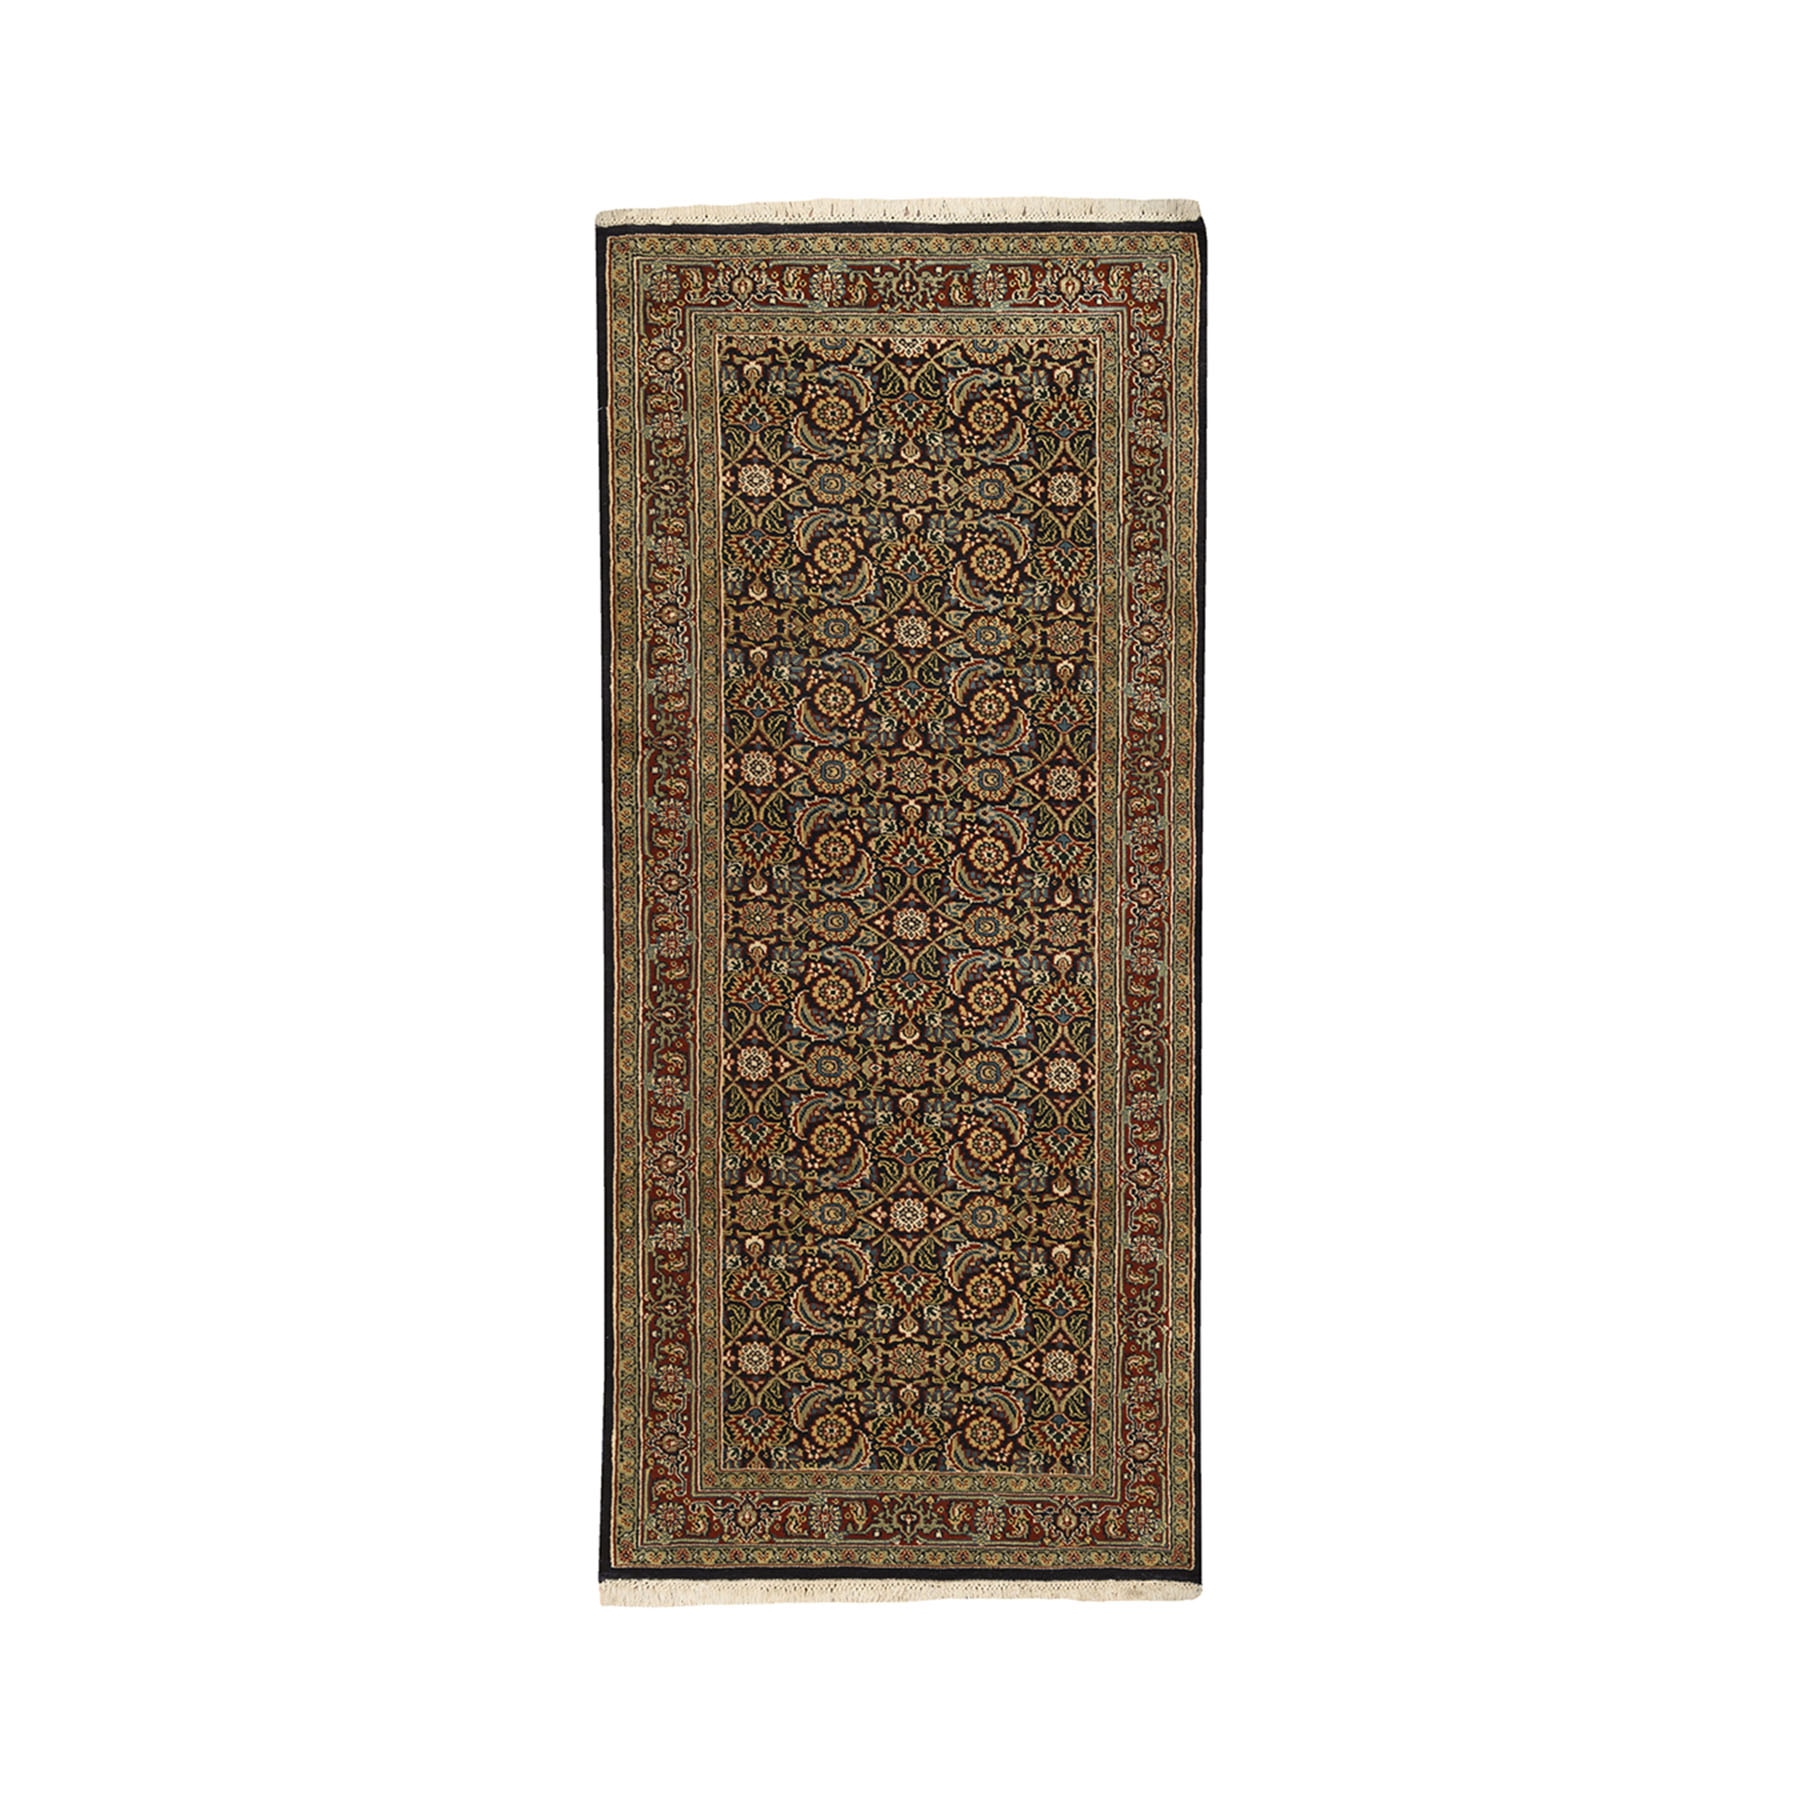 Pirniakan Collection Hand Knotted Blue Rug No: 1126004